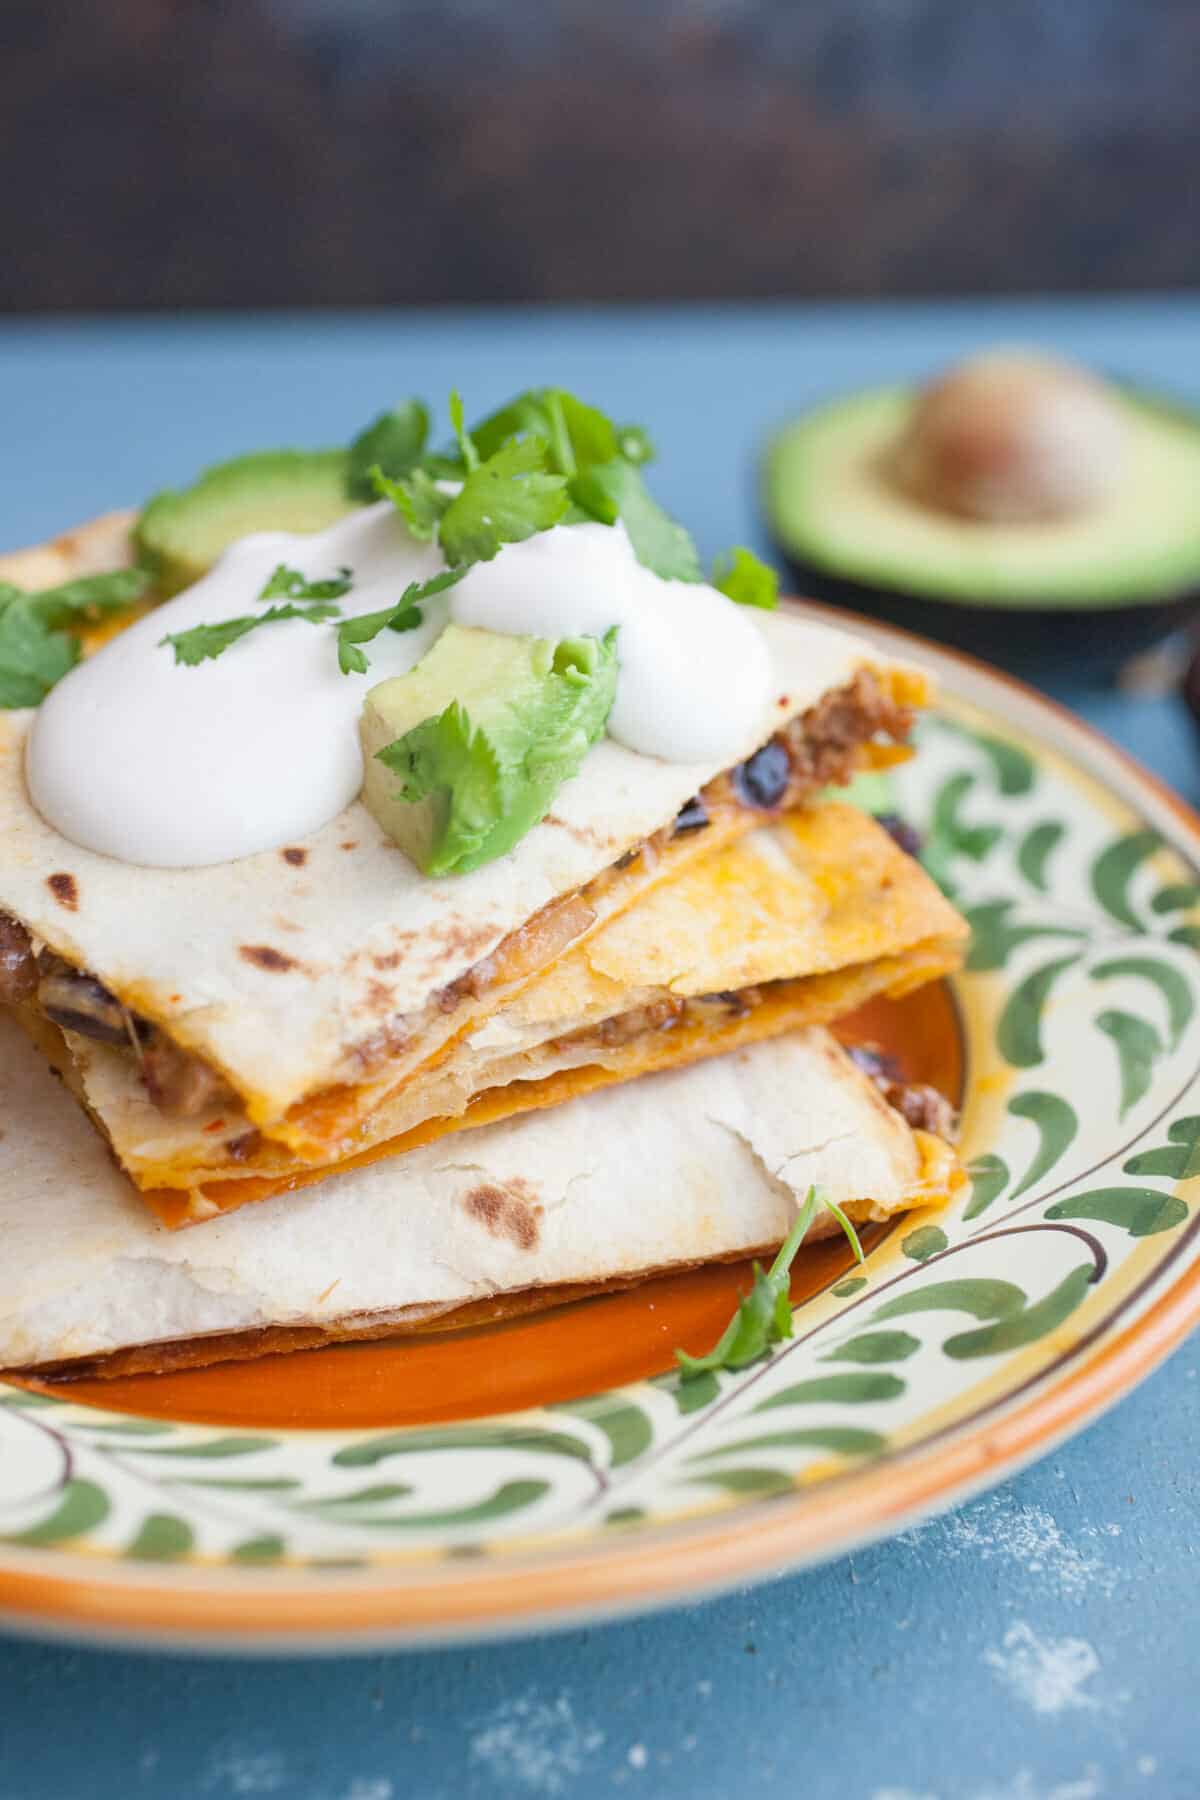 Three Chile Quesadillas: My dream quesadilla with beef, beans, and mushrooms plus a just-spicy-enough three chile spice mix! | macheesmo.com